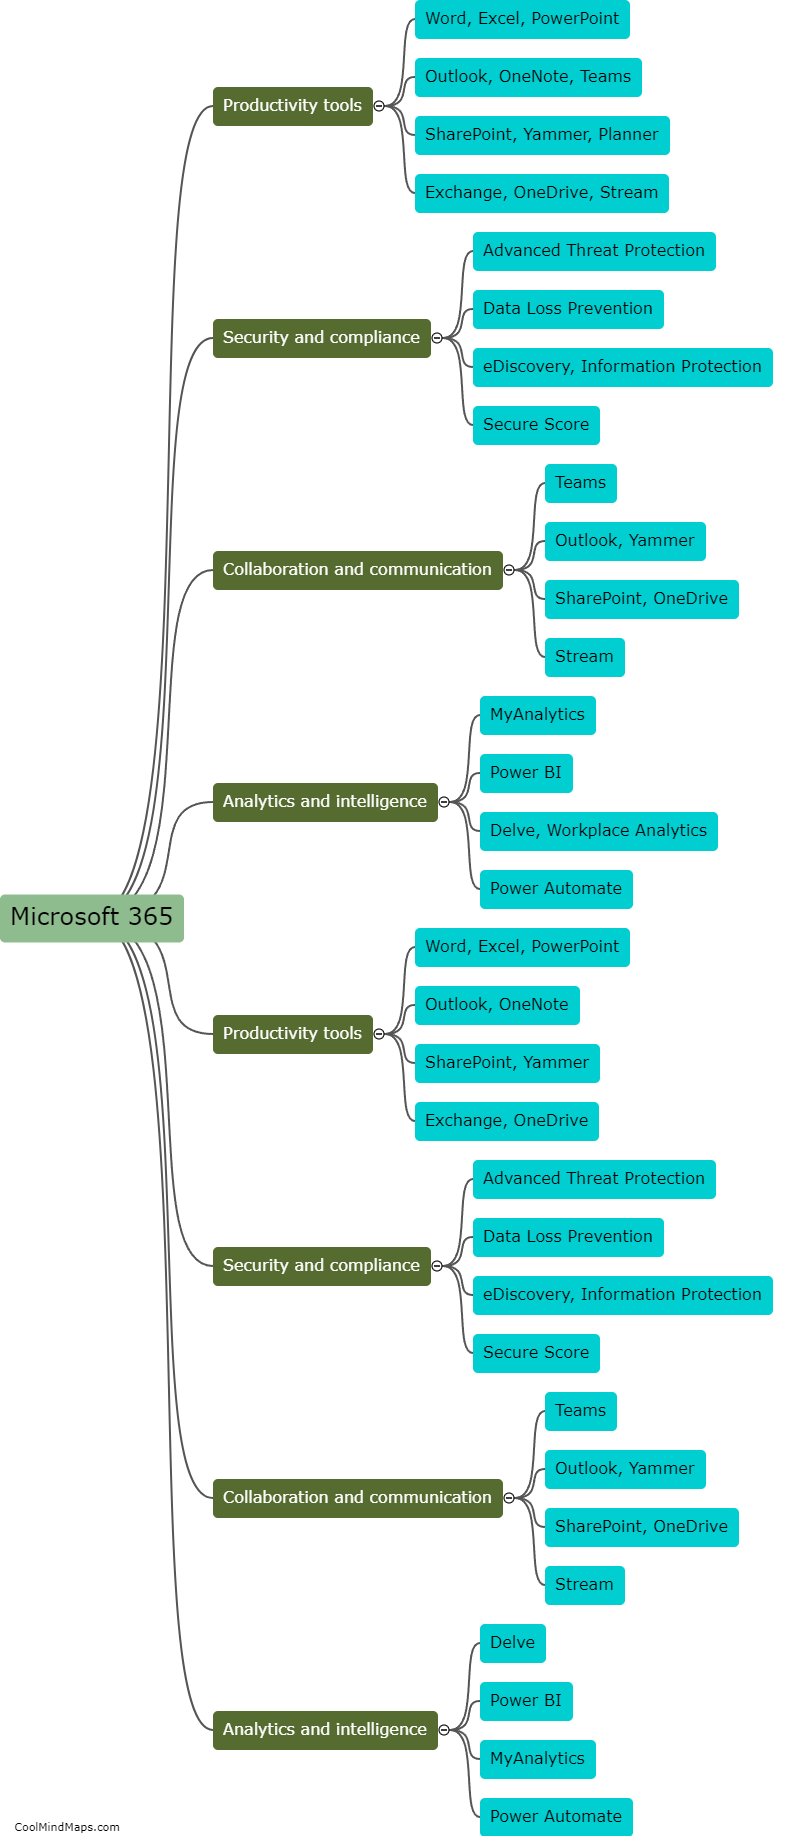 How does Microsoft 365 differ from Office 365?